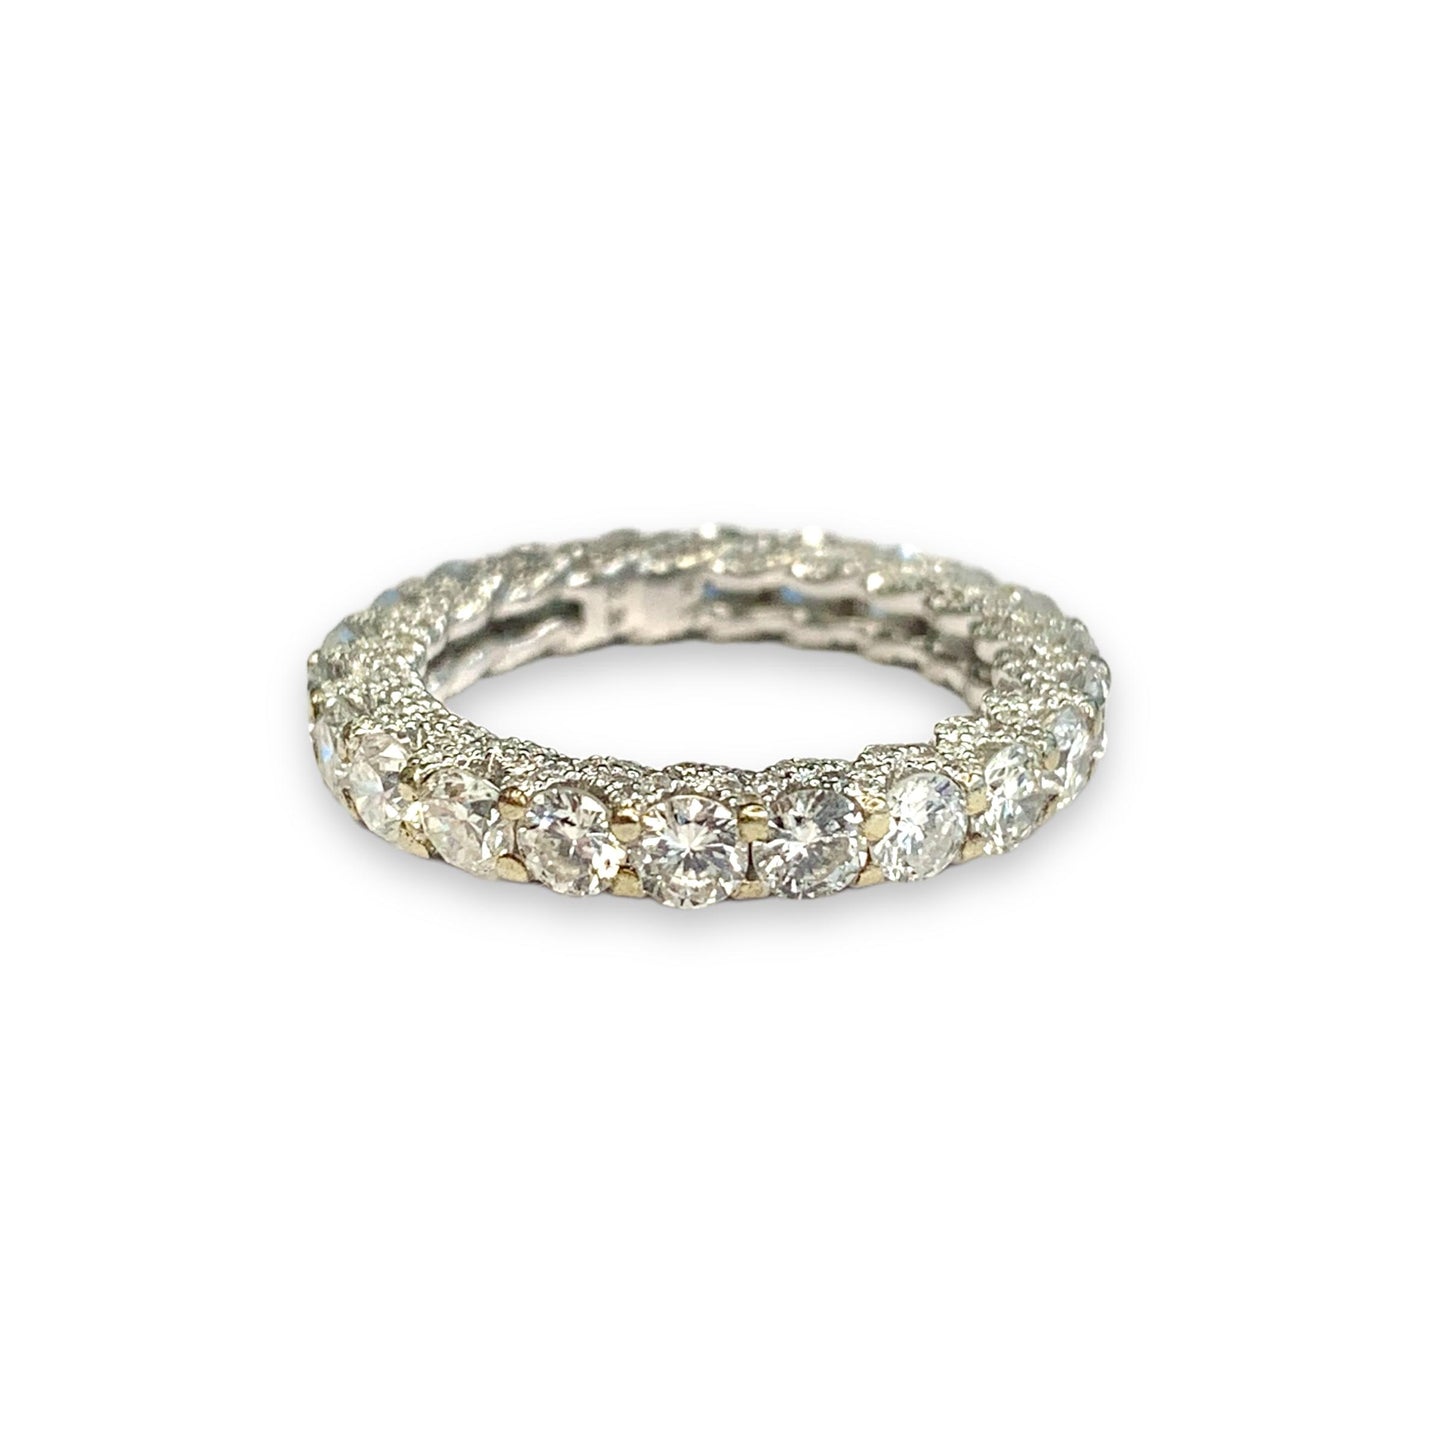 3.05 cttw. Eternety Band in 18K White Gold